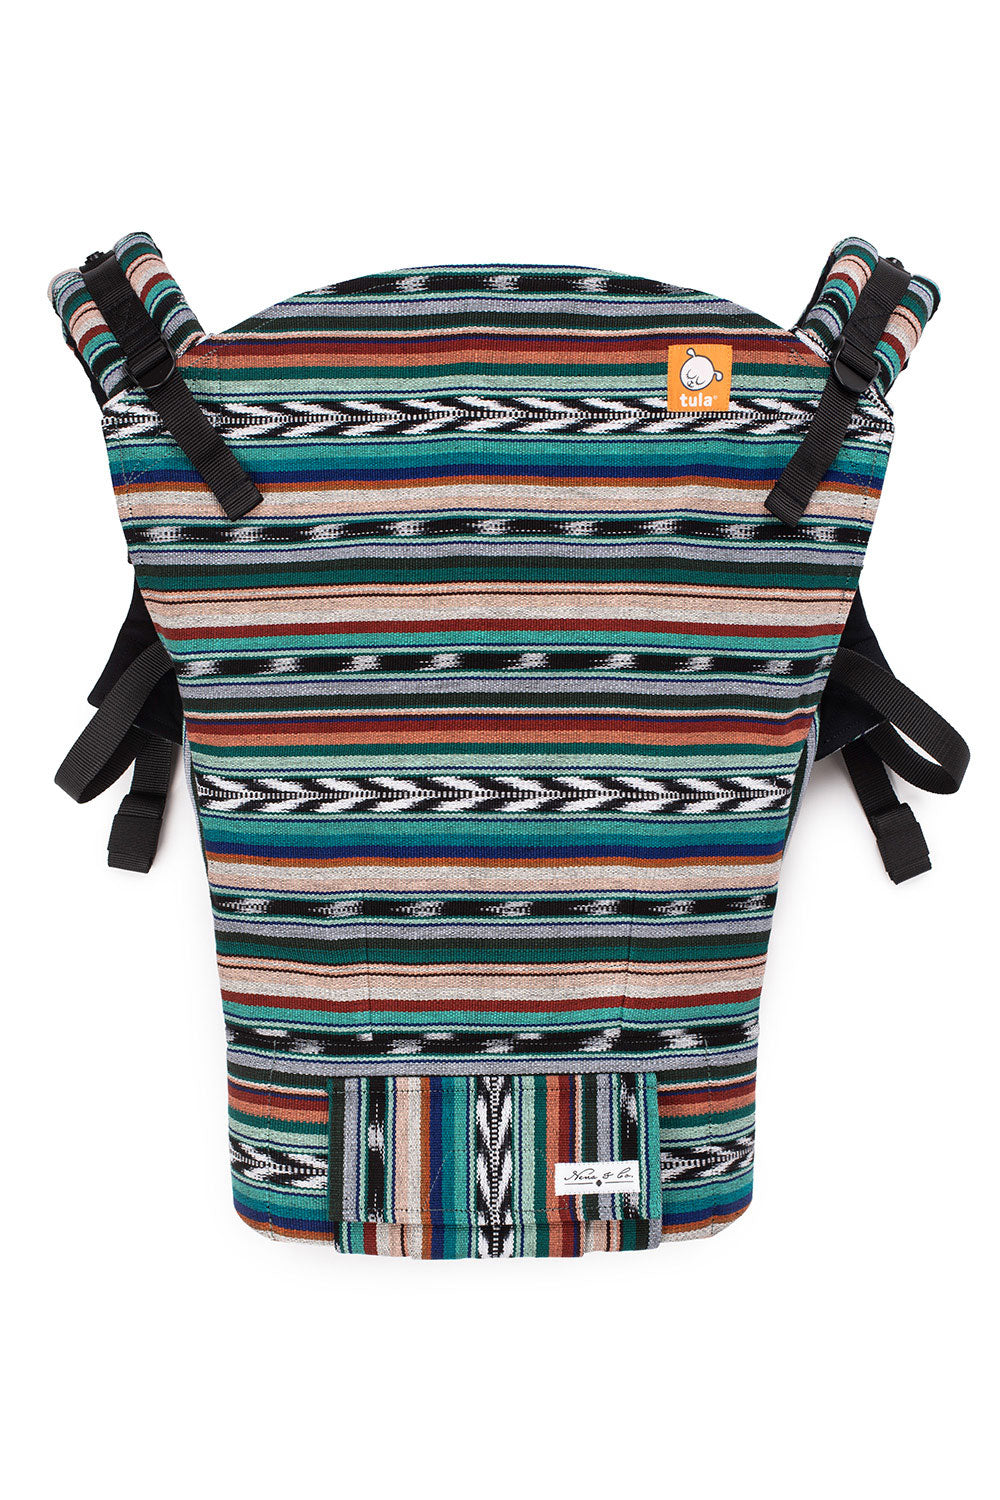 Blue Lagoon - Signature Woven Toddler Carrier